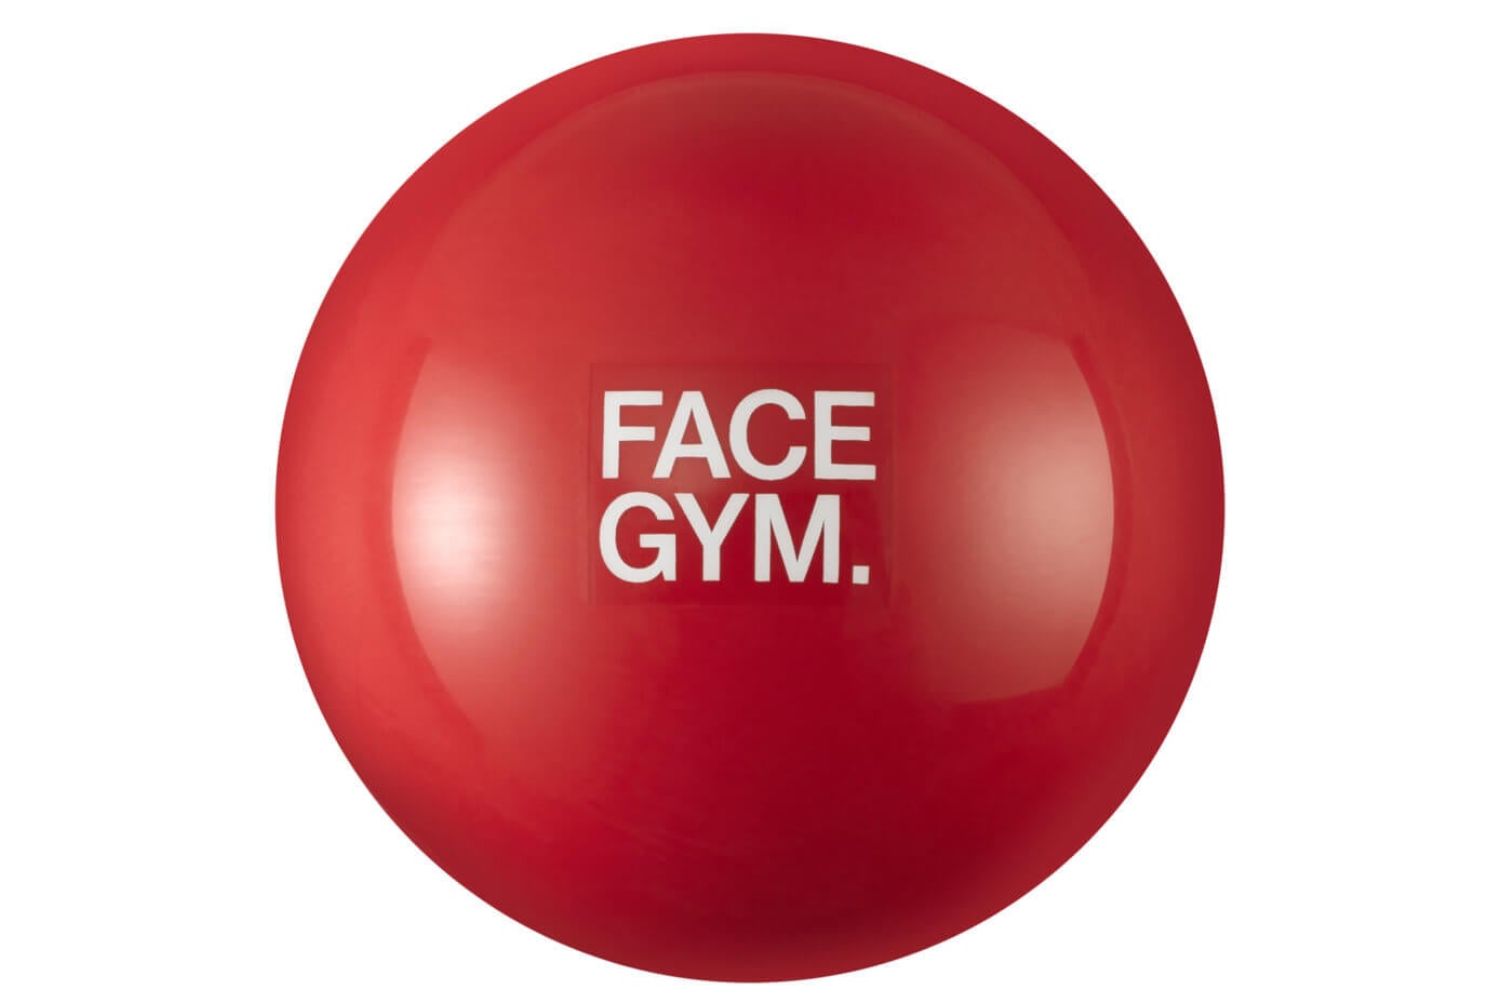 FACEGYM Weighted Face Ball, $45 at Mecca